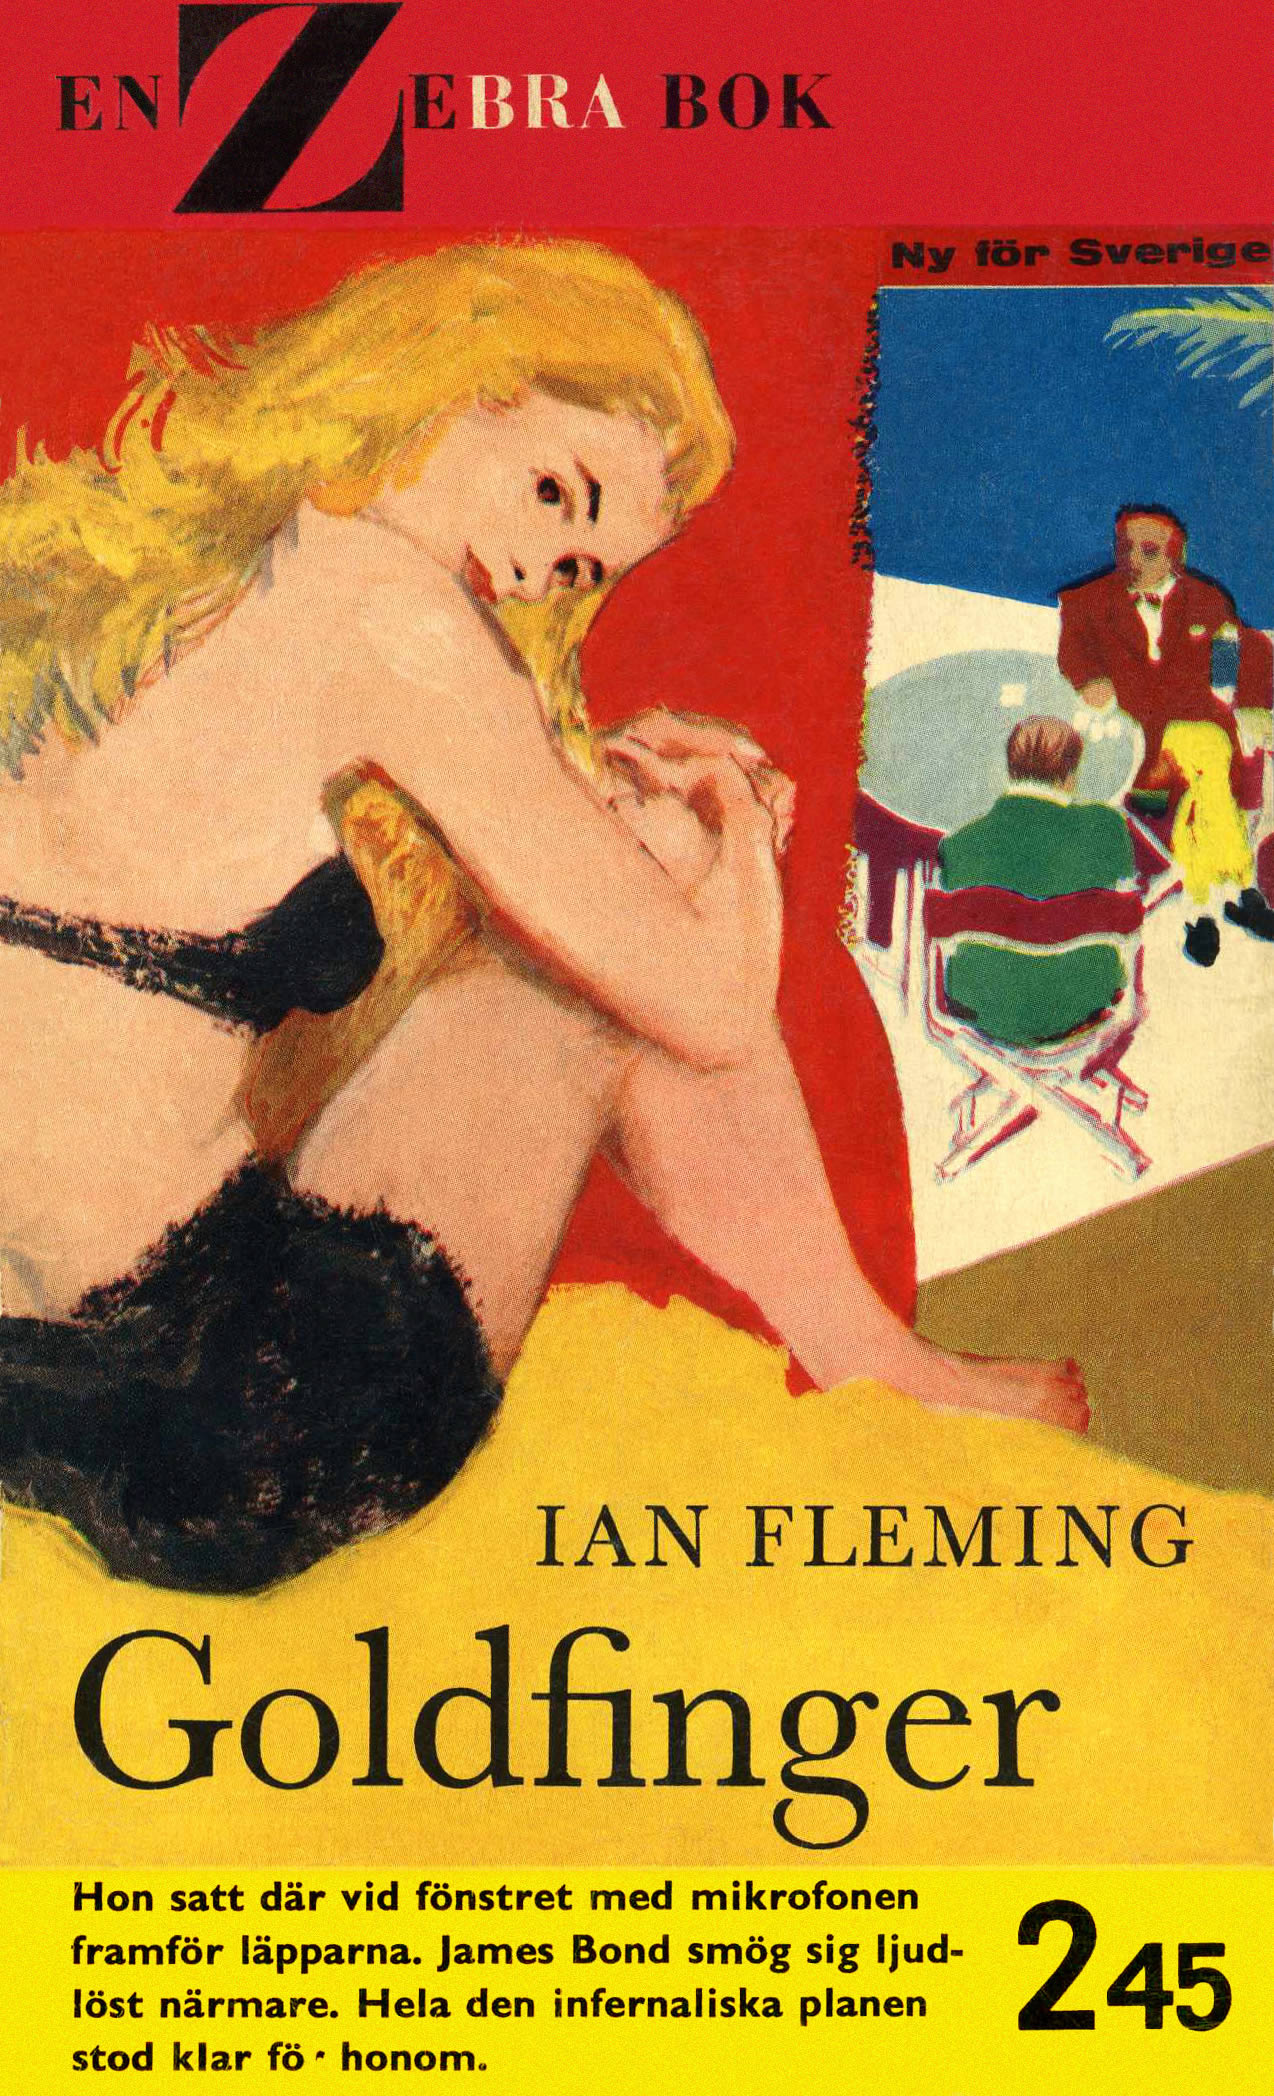 First edition UK hardcover of Goldfinger (1959)